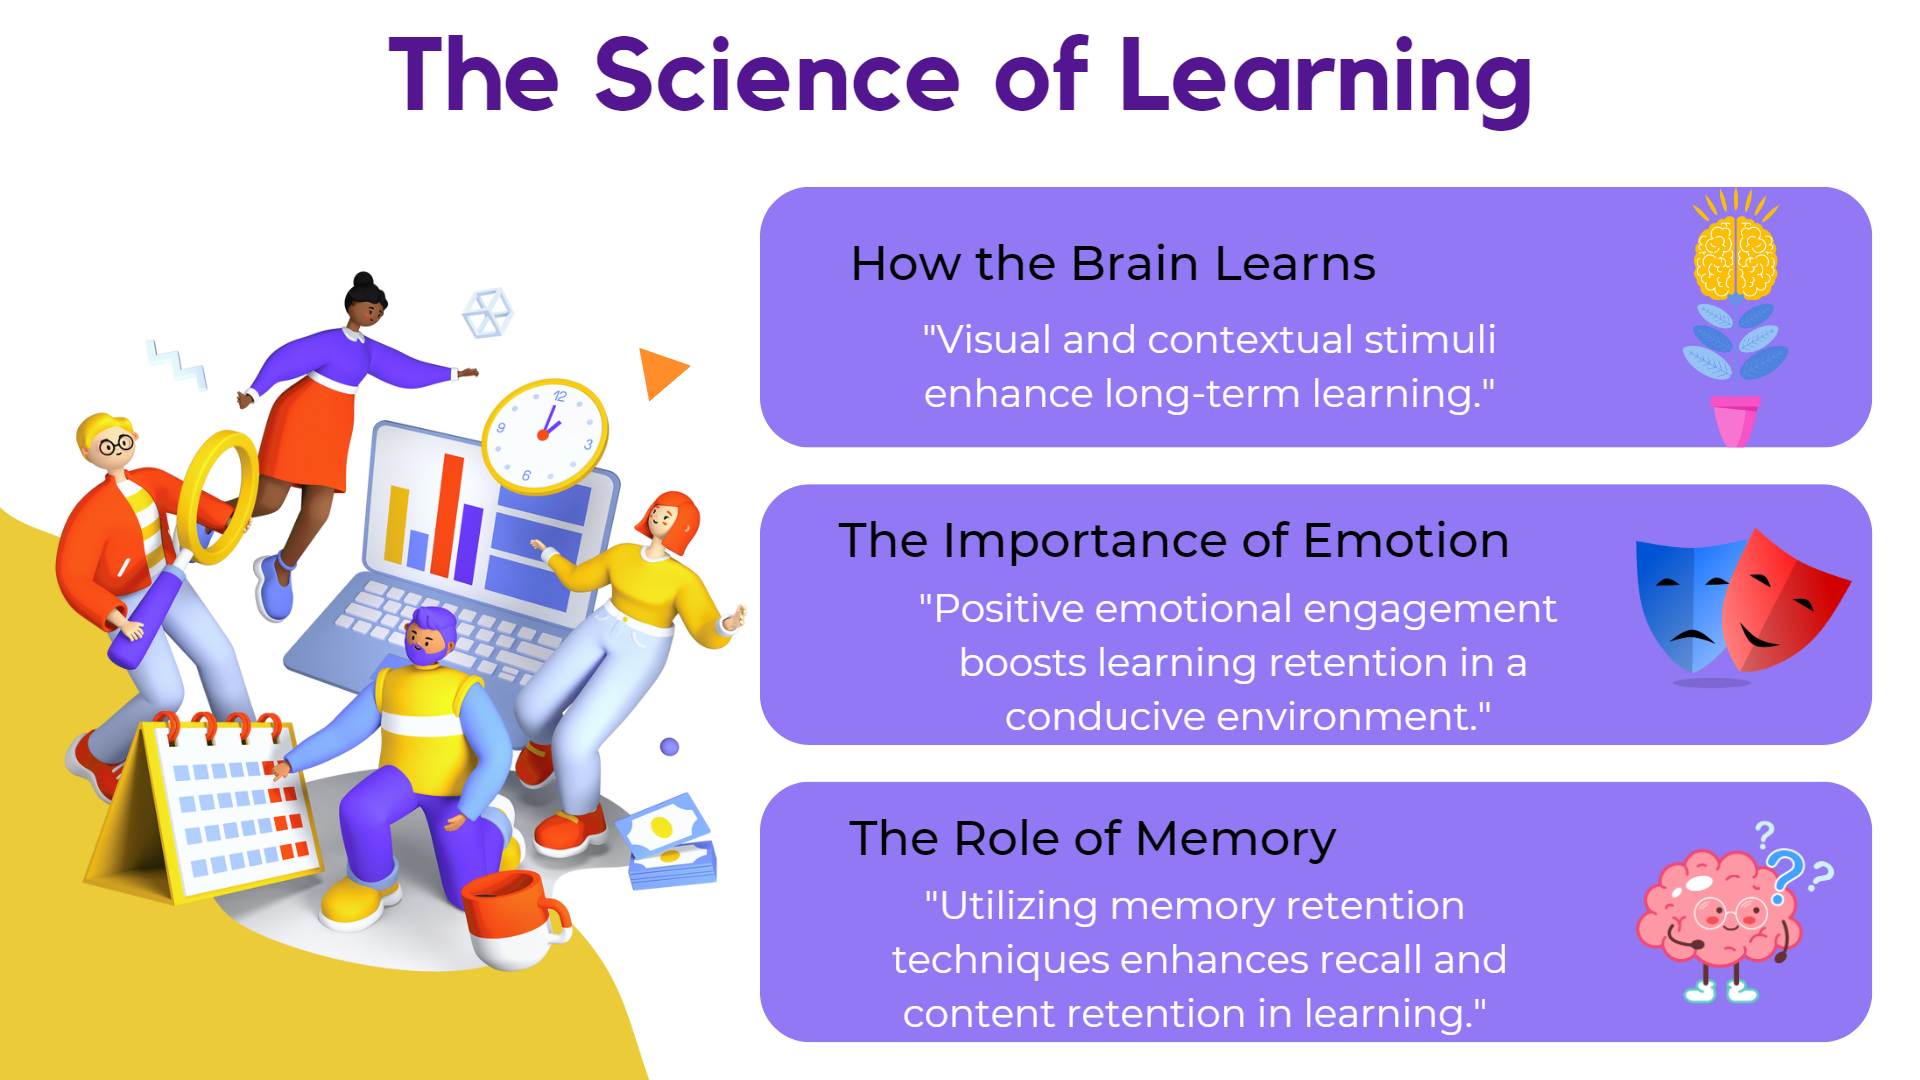 The Science of Learning: Strategies for Memory and Retention